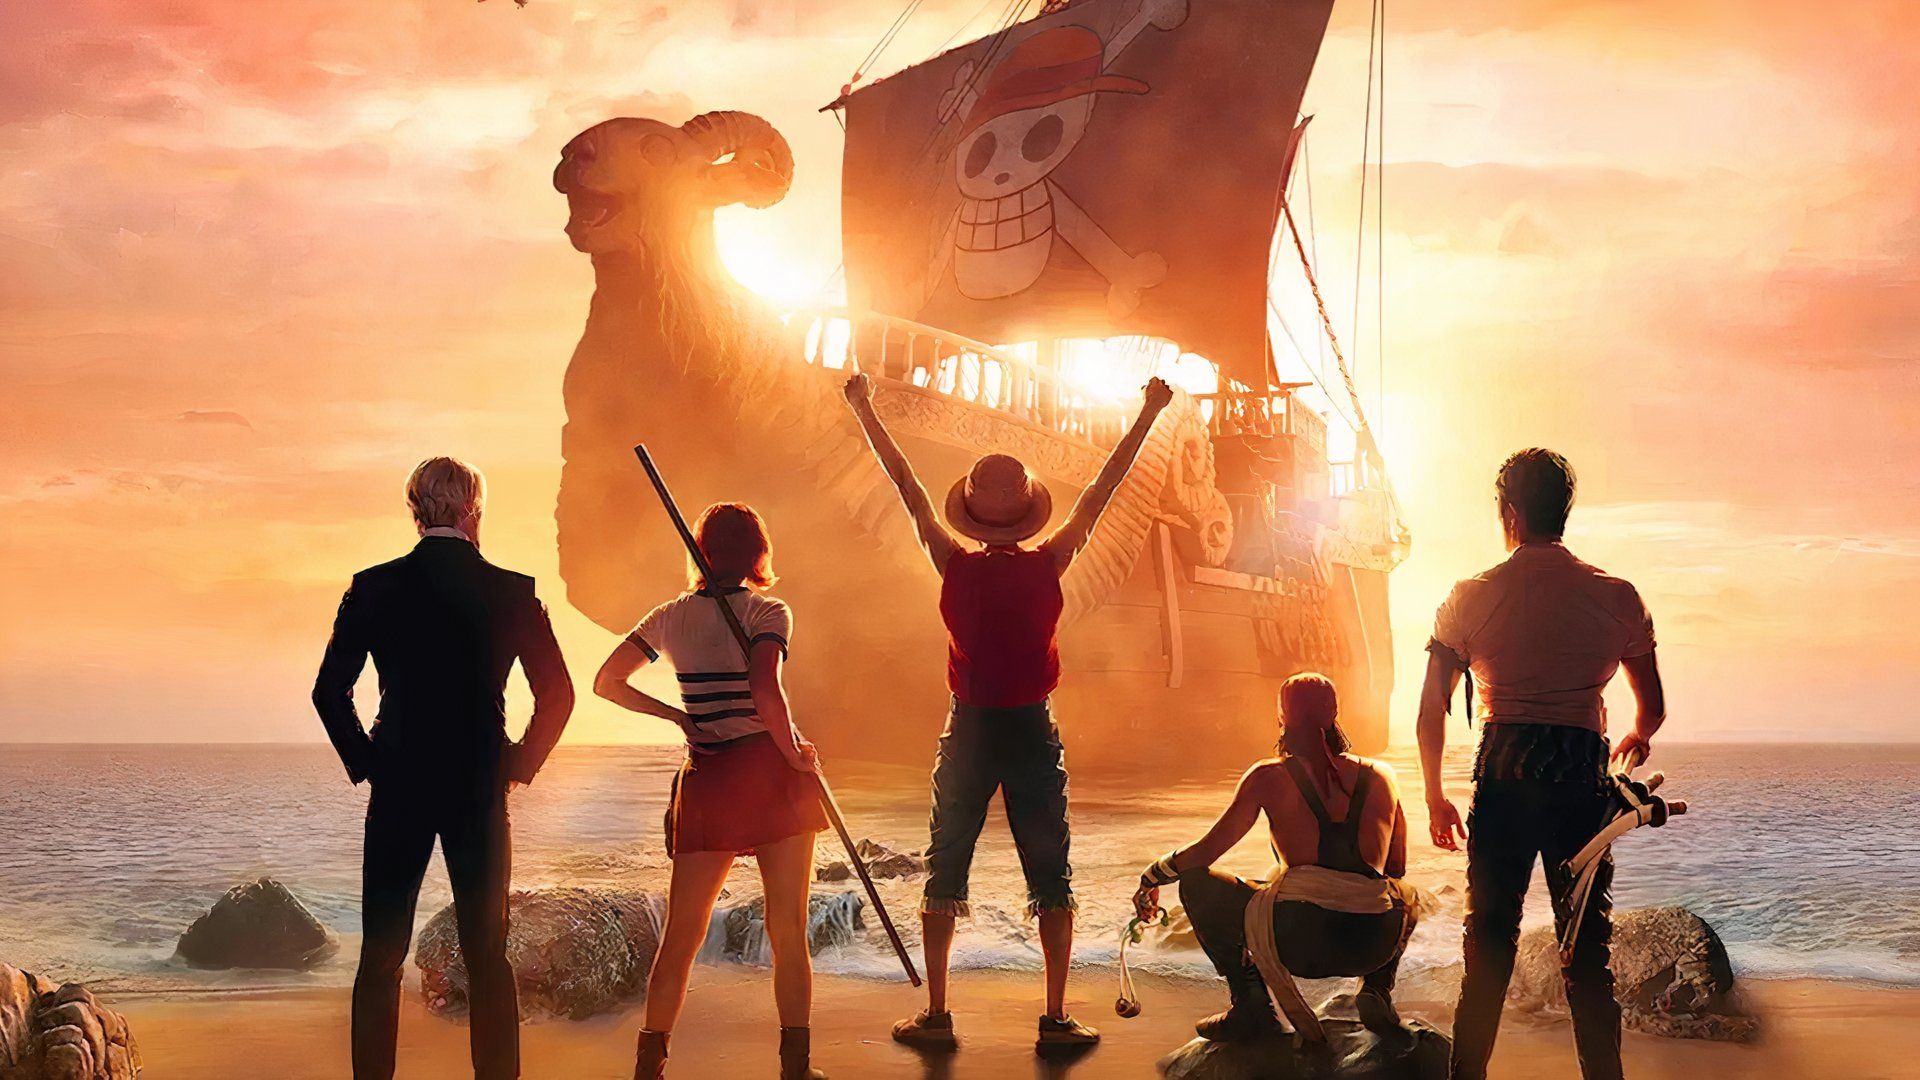 Production begins on Netflix’s second live-action season of One Piece